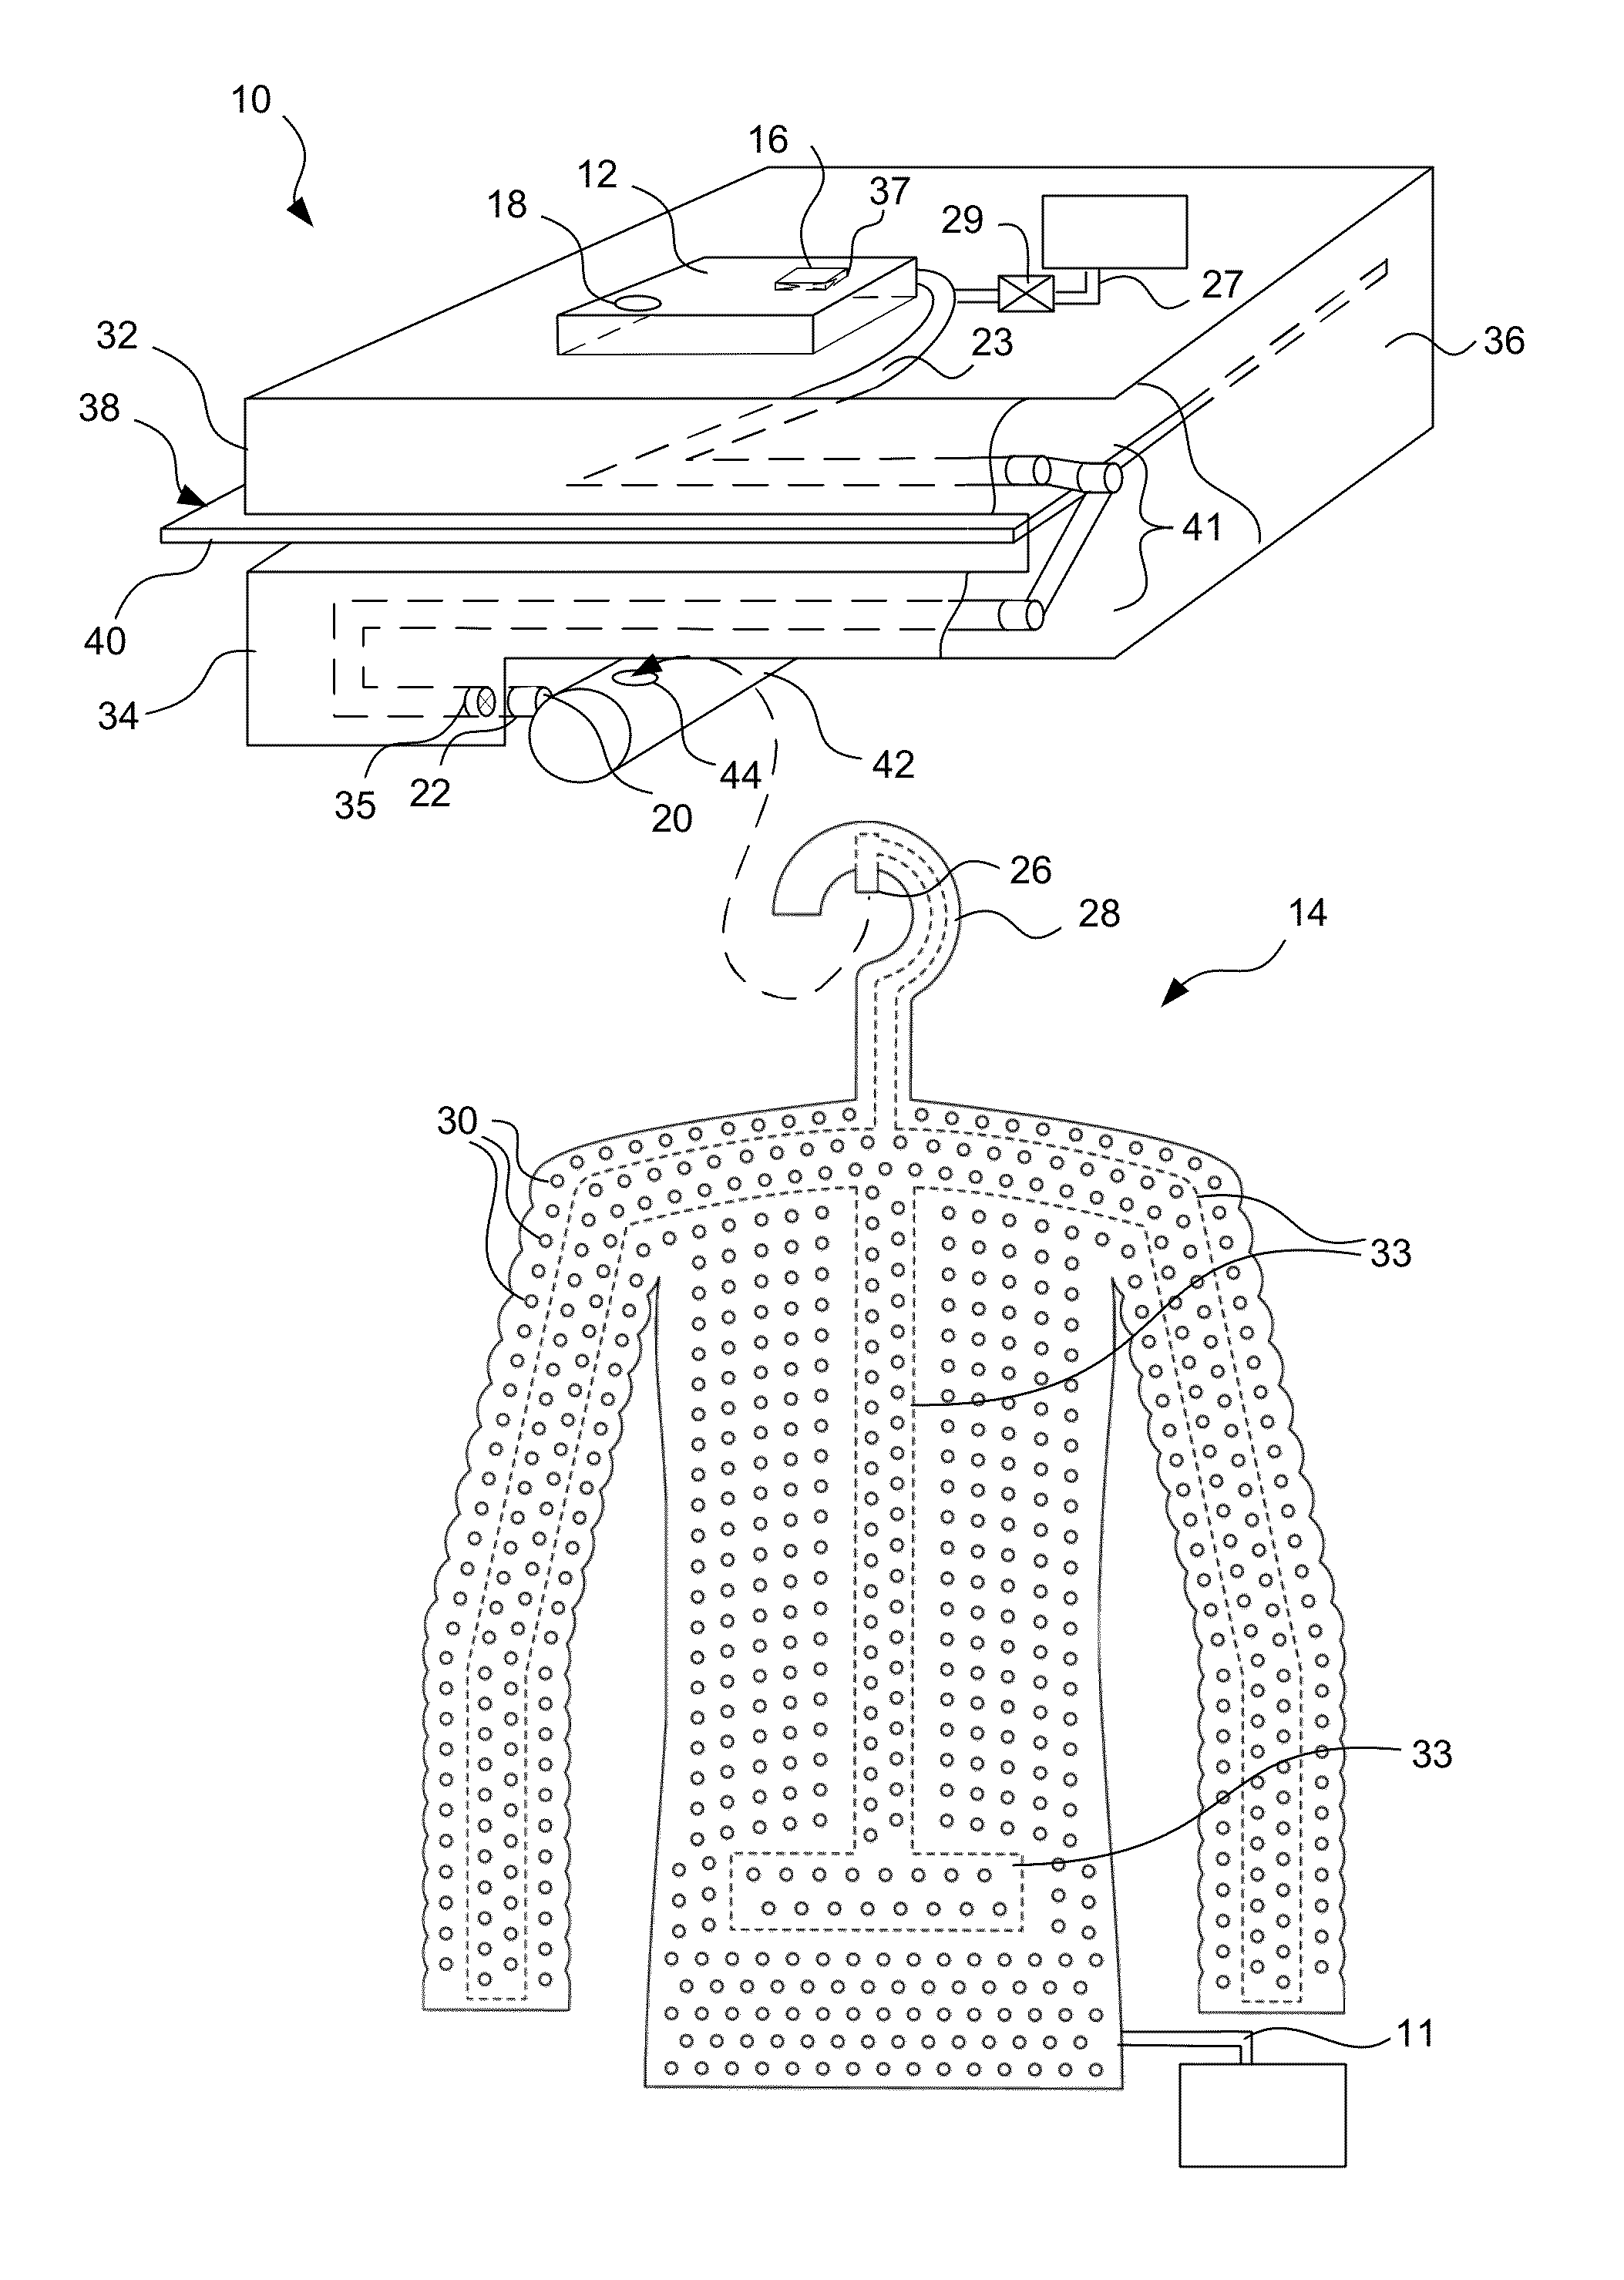 System for steam treatment of textiles